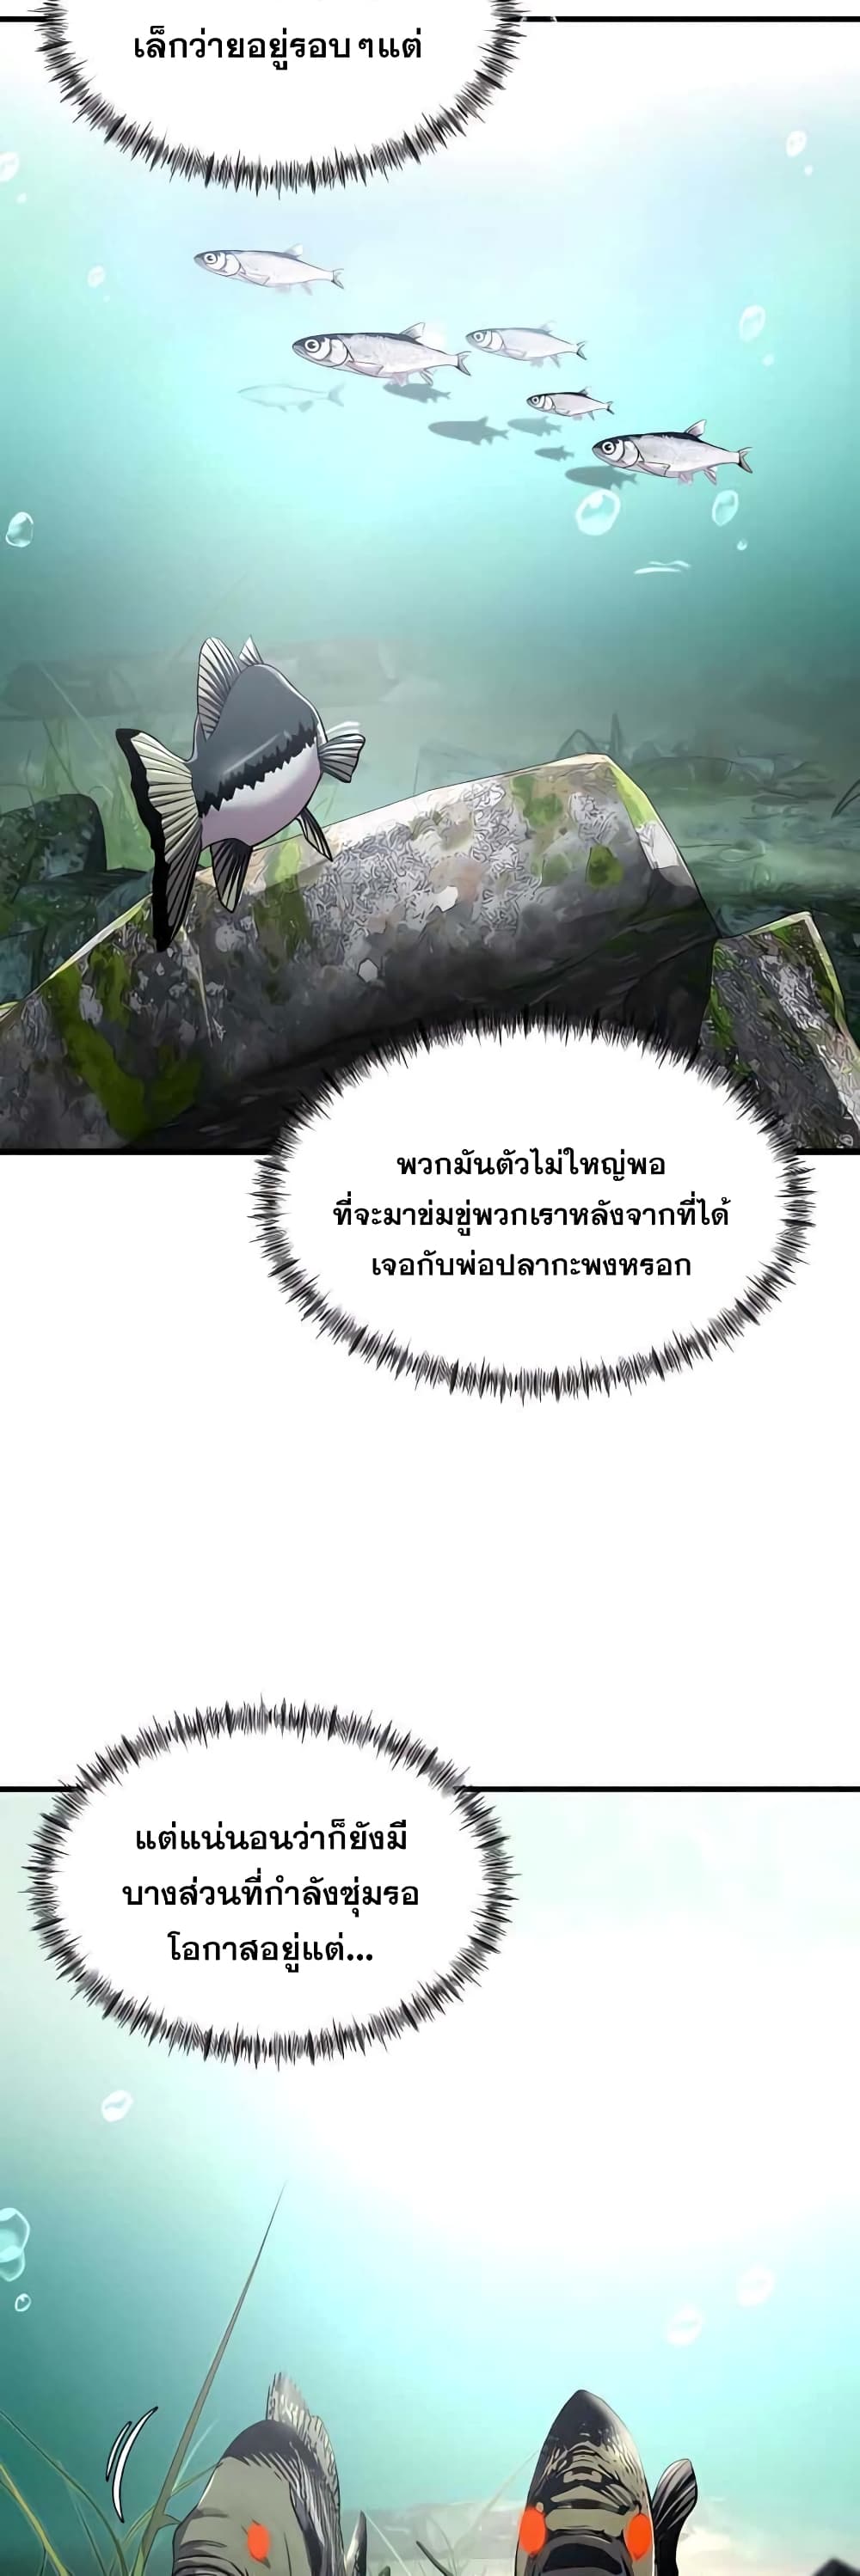 Surviving As a Fish ตอนที่ 3 (27)